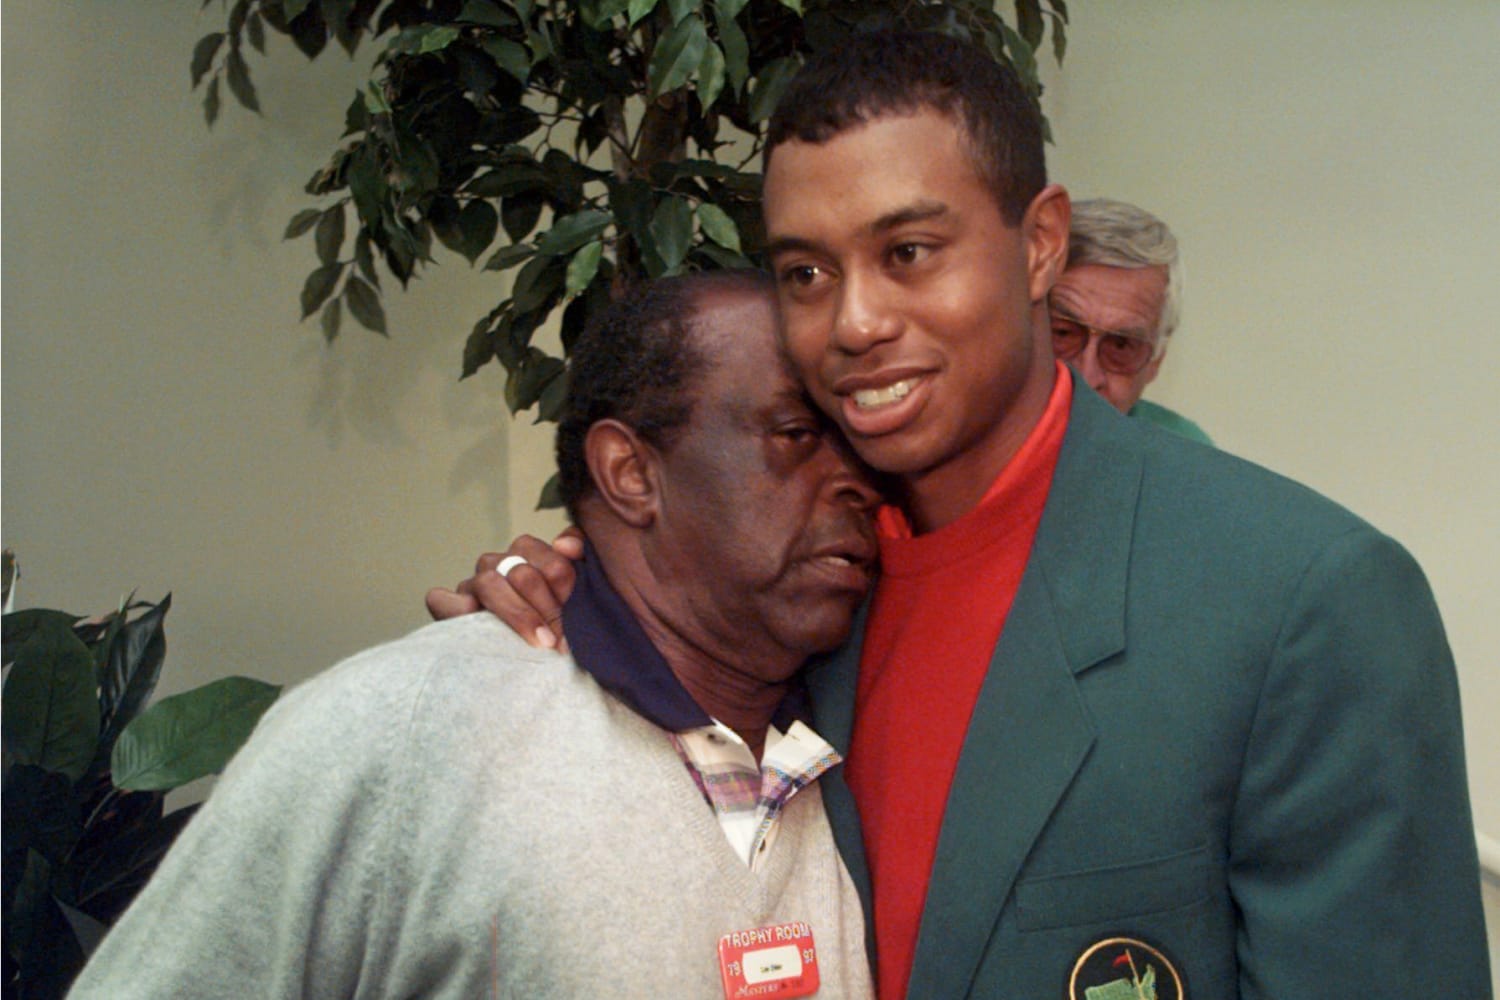 Black golf fans mourn Lee Elder’s death as Tiger Woods says injuries will limit his play